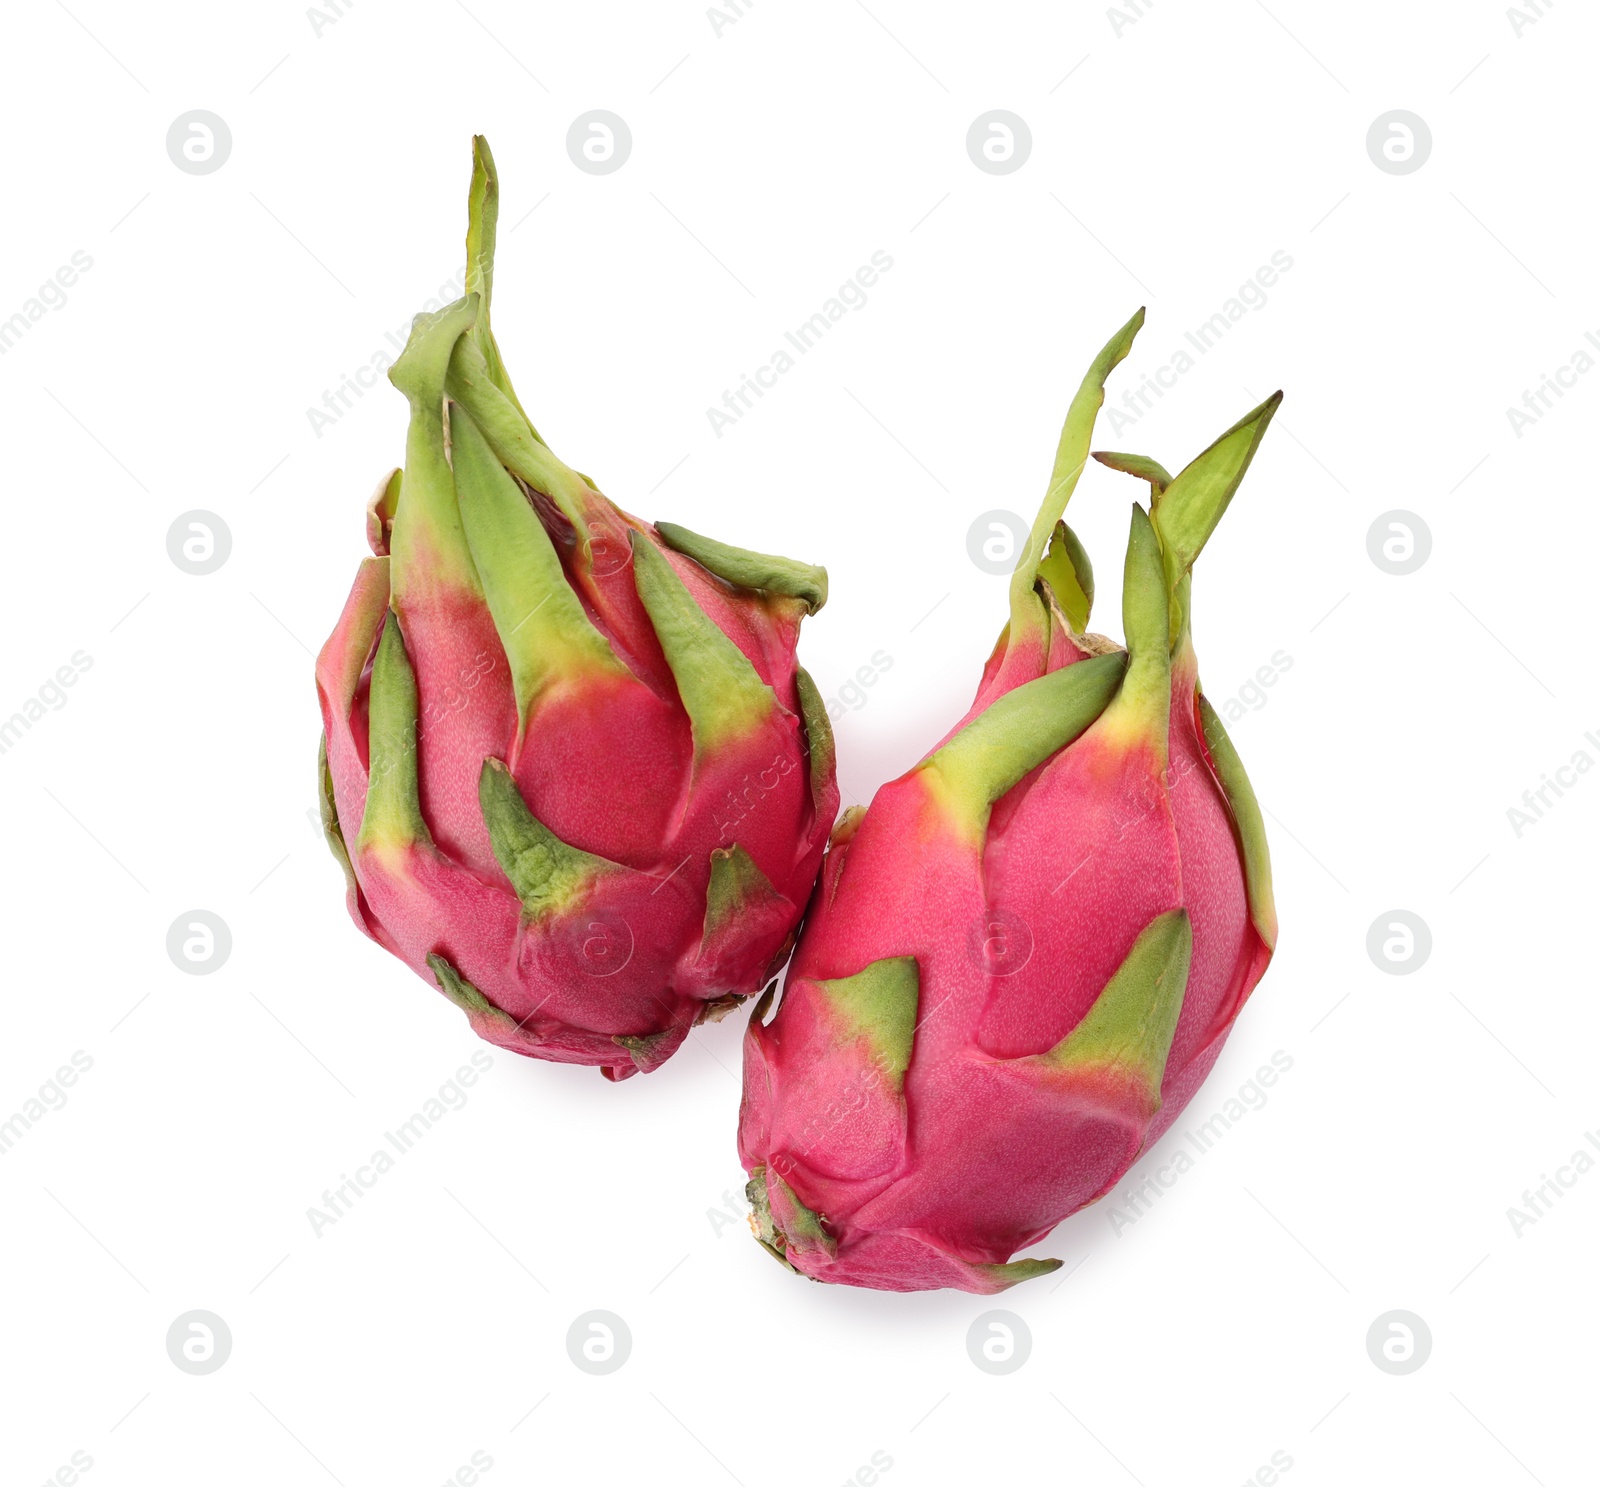 Photo of Delicious pink dragon fruits (pitahaya) on white background, top view